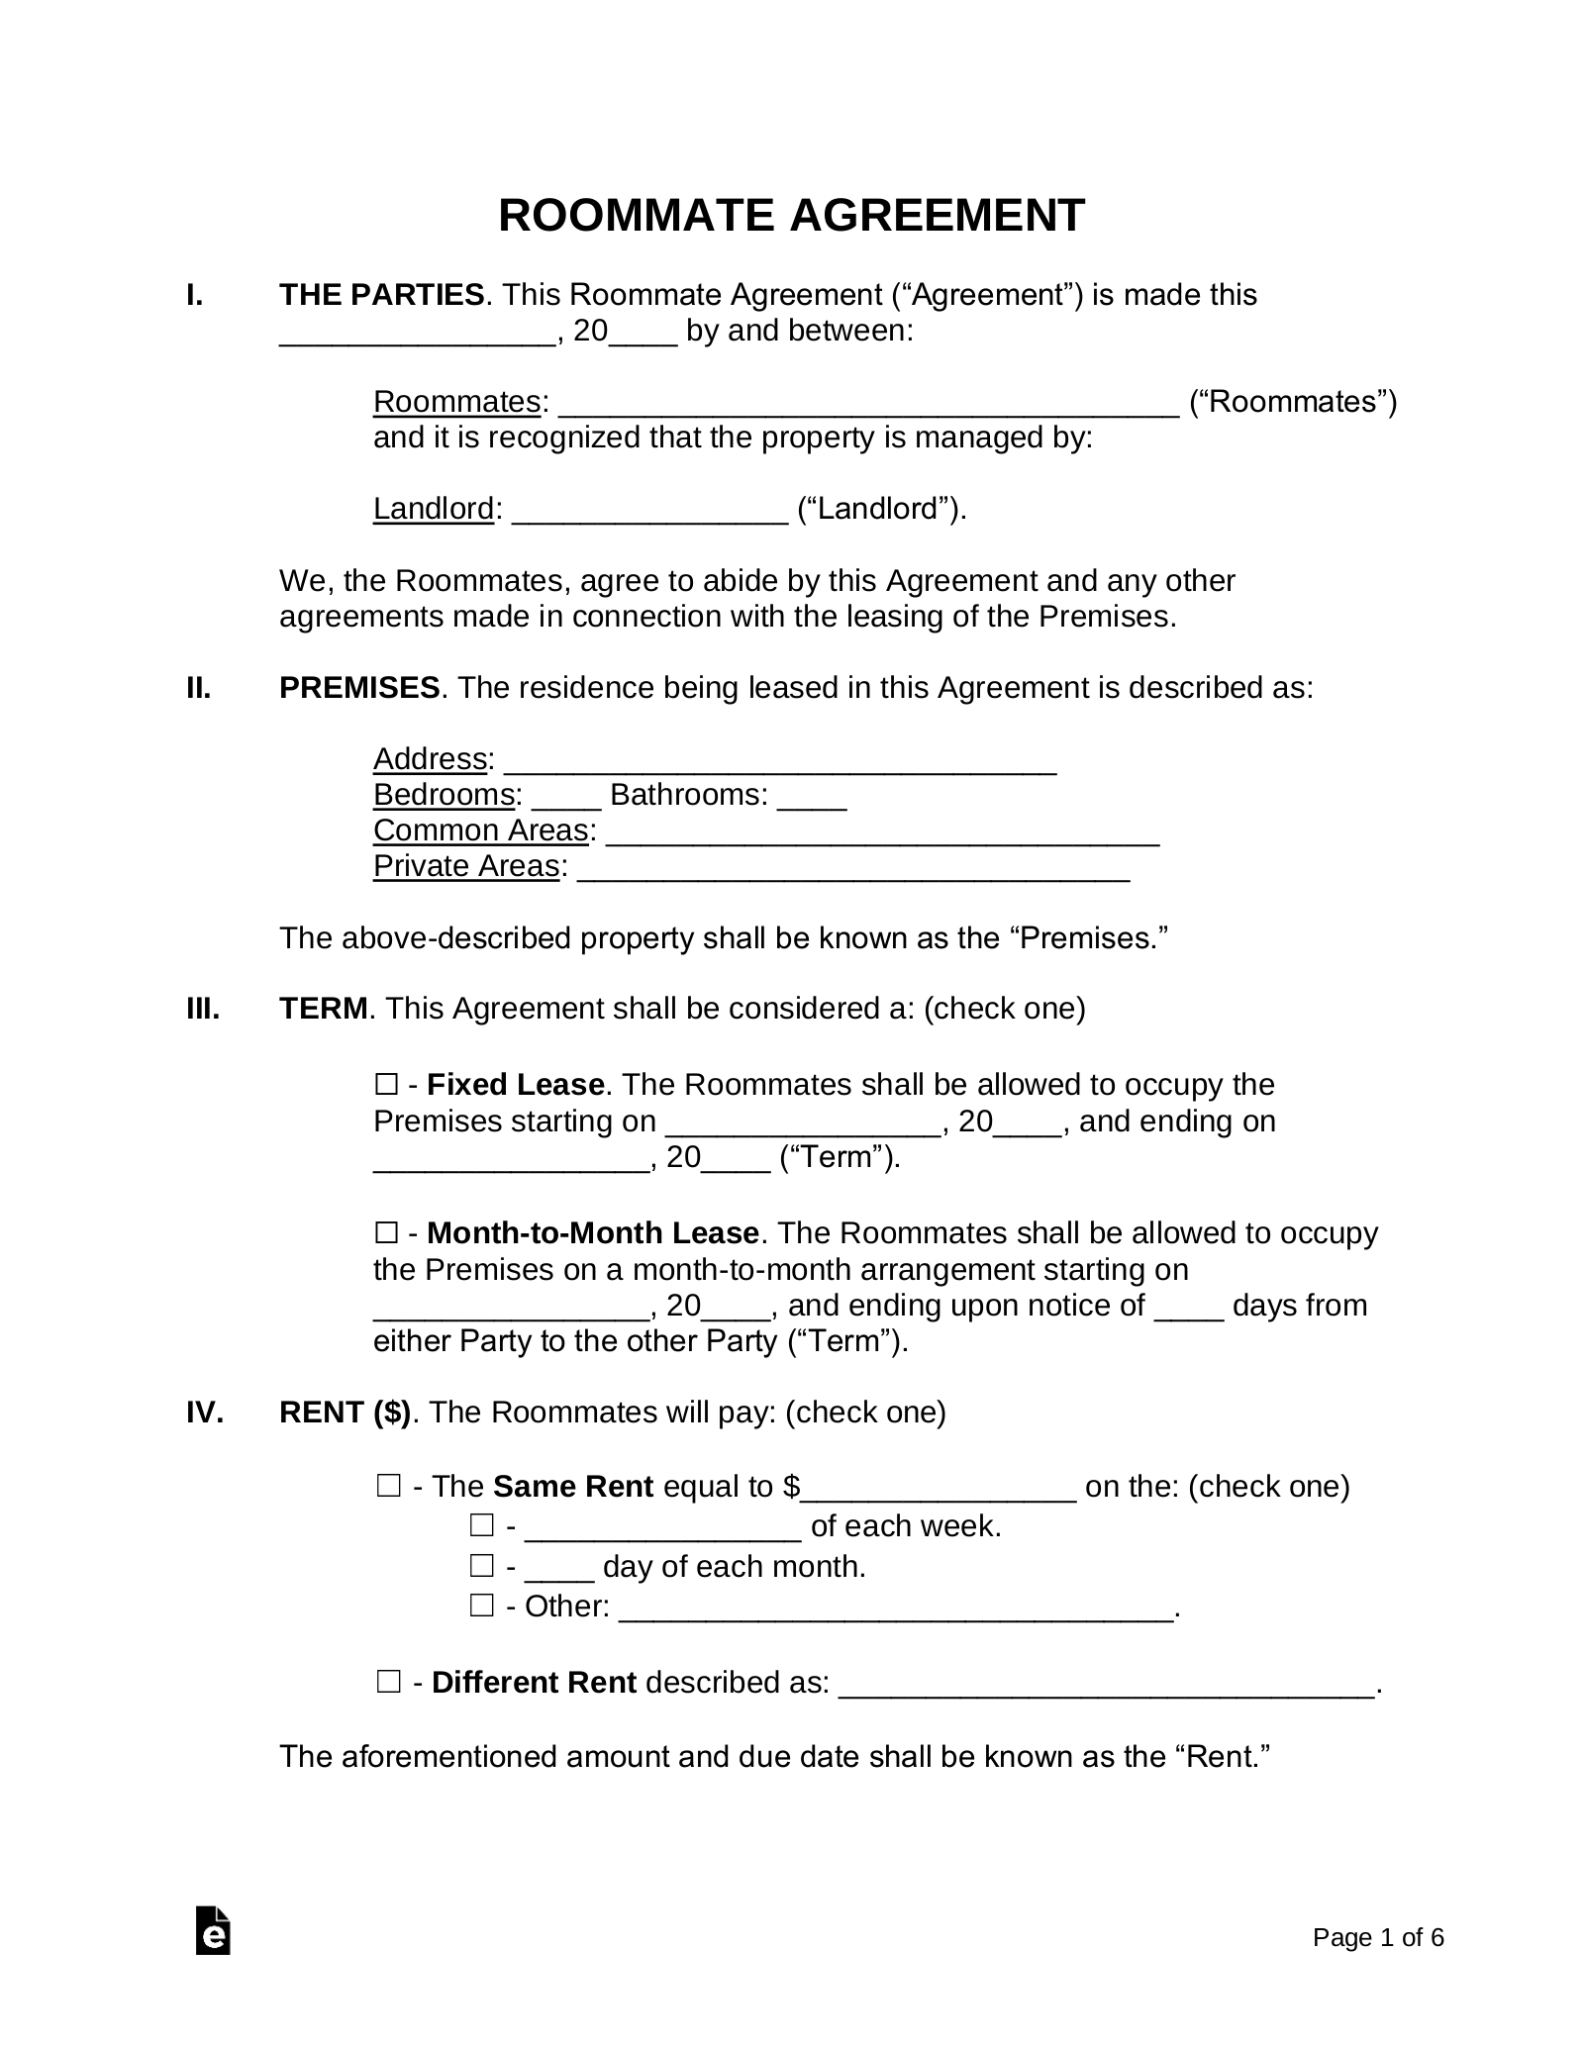 Free Roommate (Room Rental) Agreement Template - Pdf | Word - Eforms Throughout Free Printable Residential Lease Agreement Template